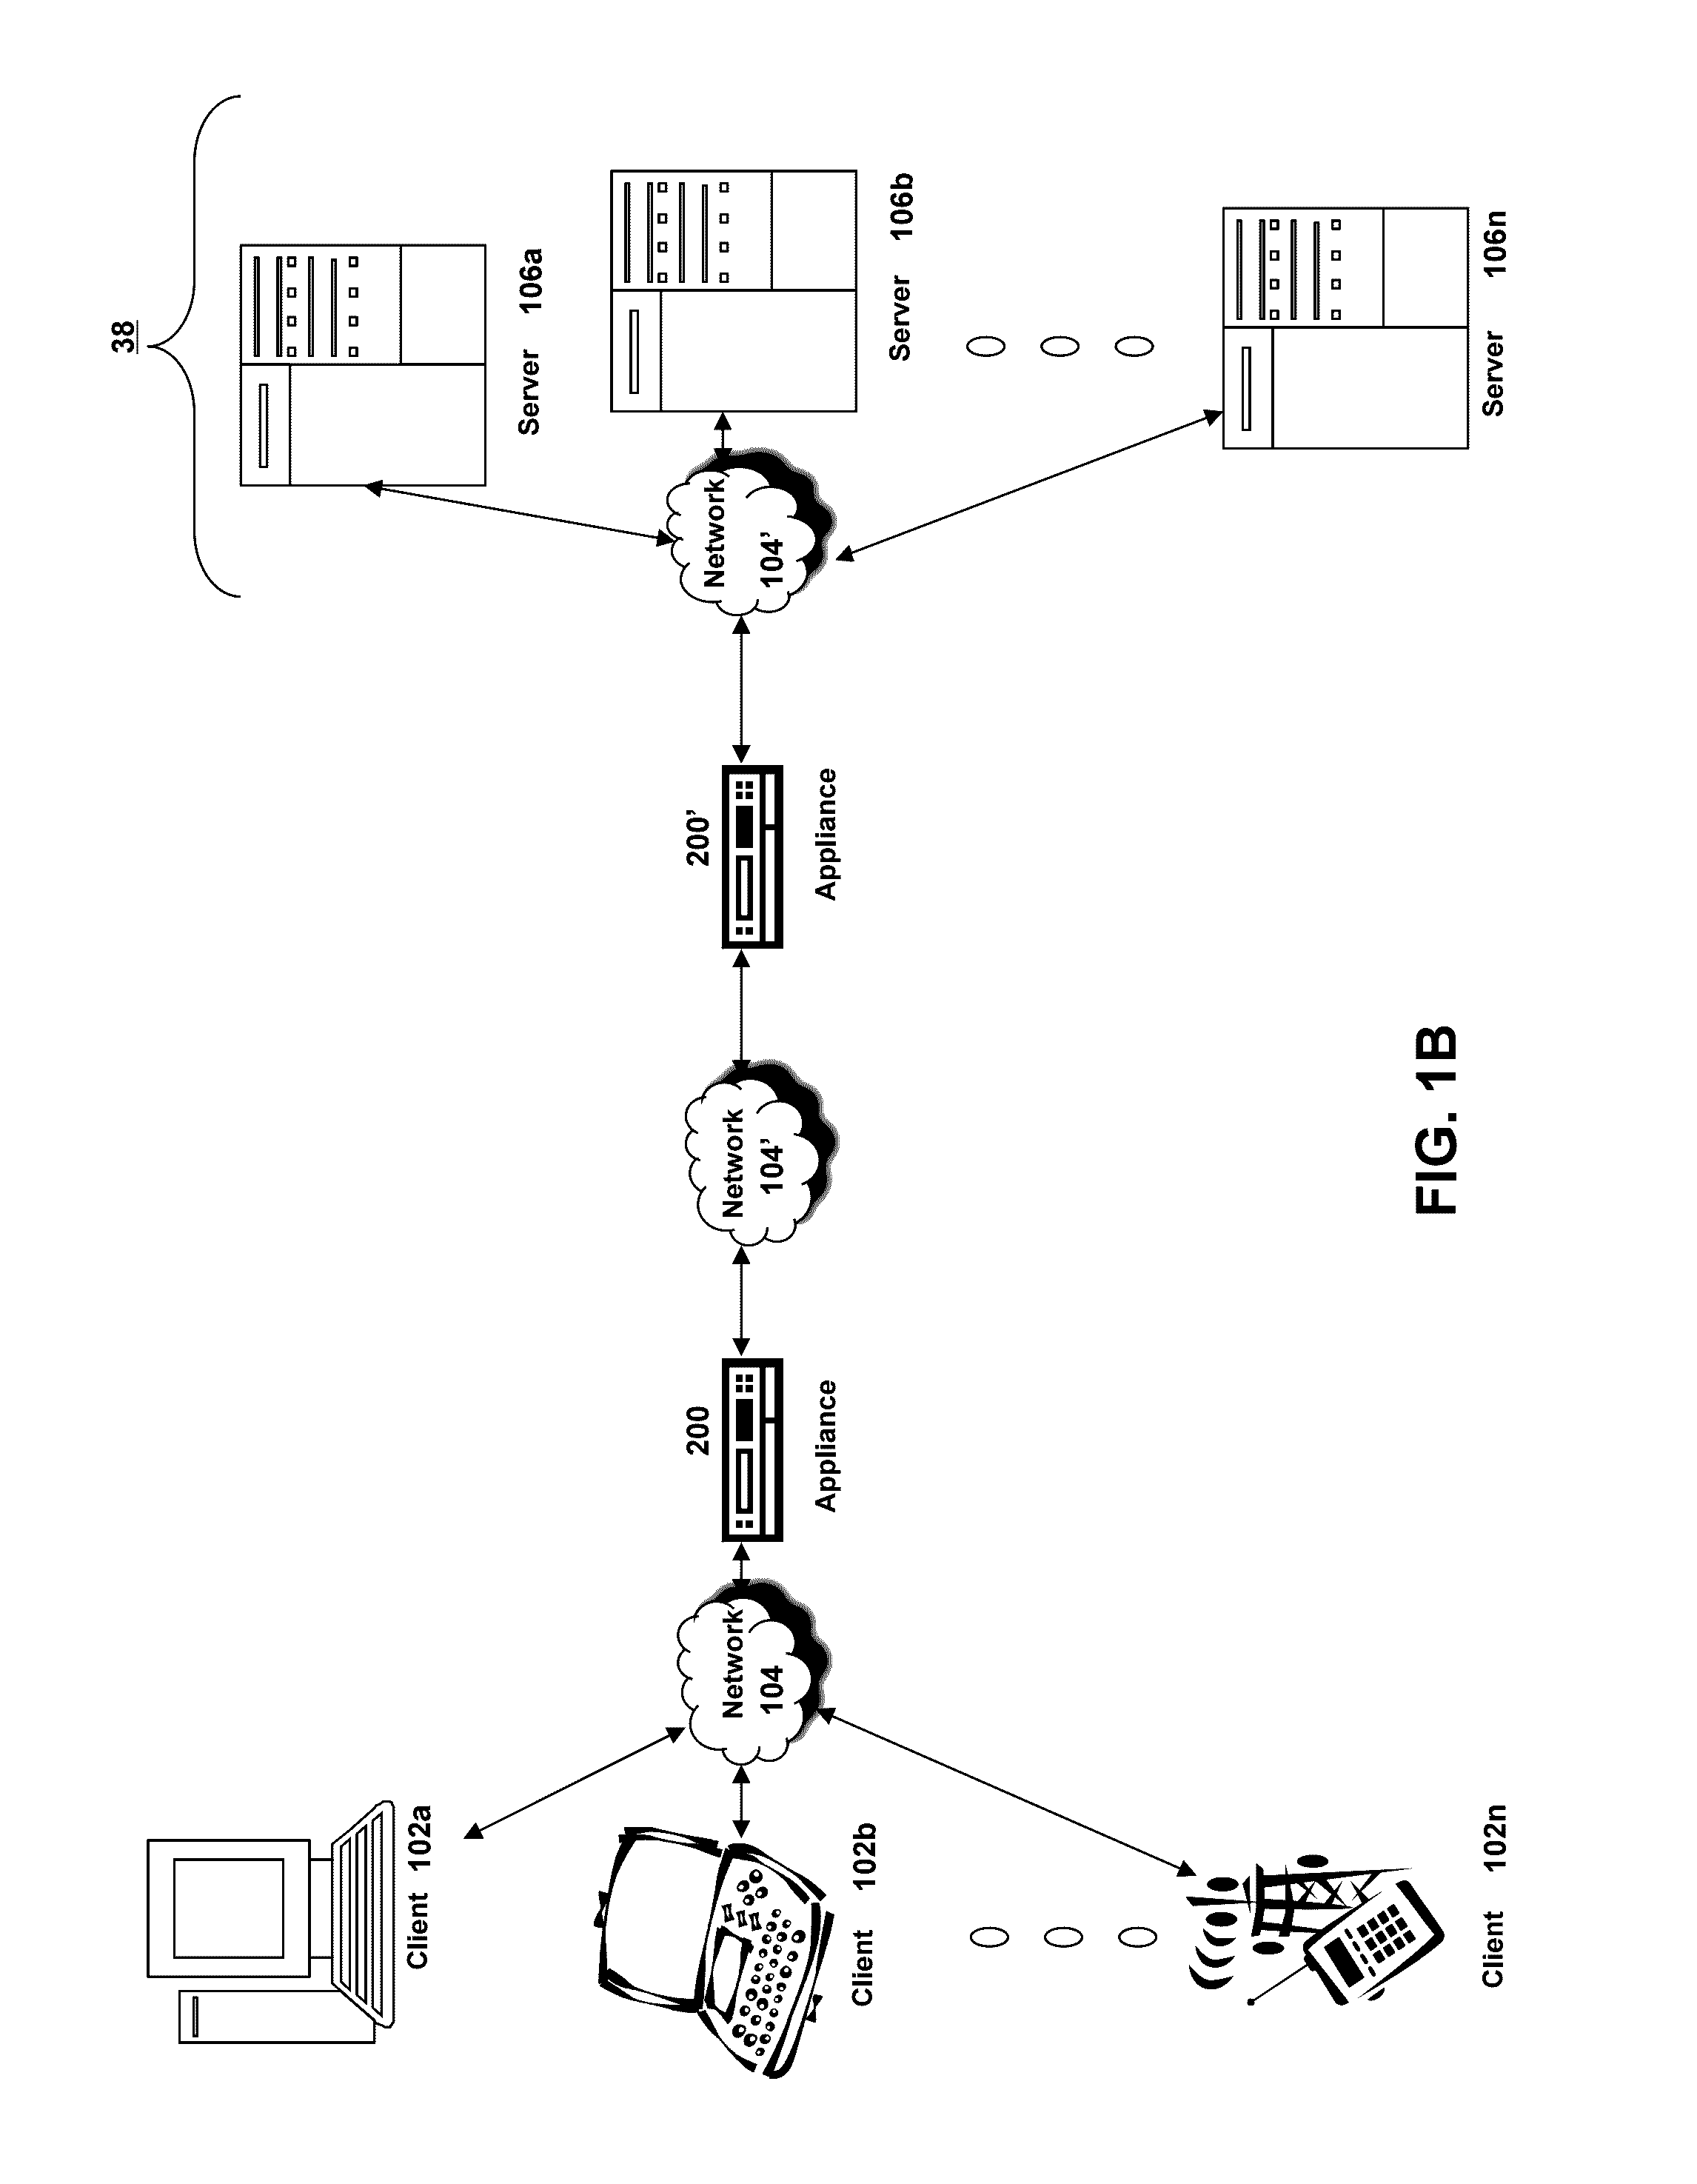 Systems and methods for integrating a device with a software-defined networking controller